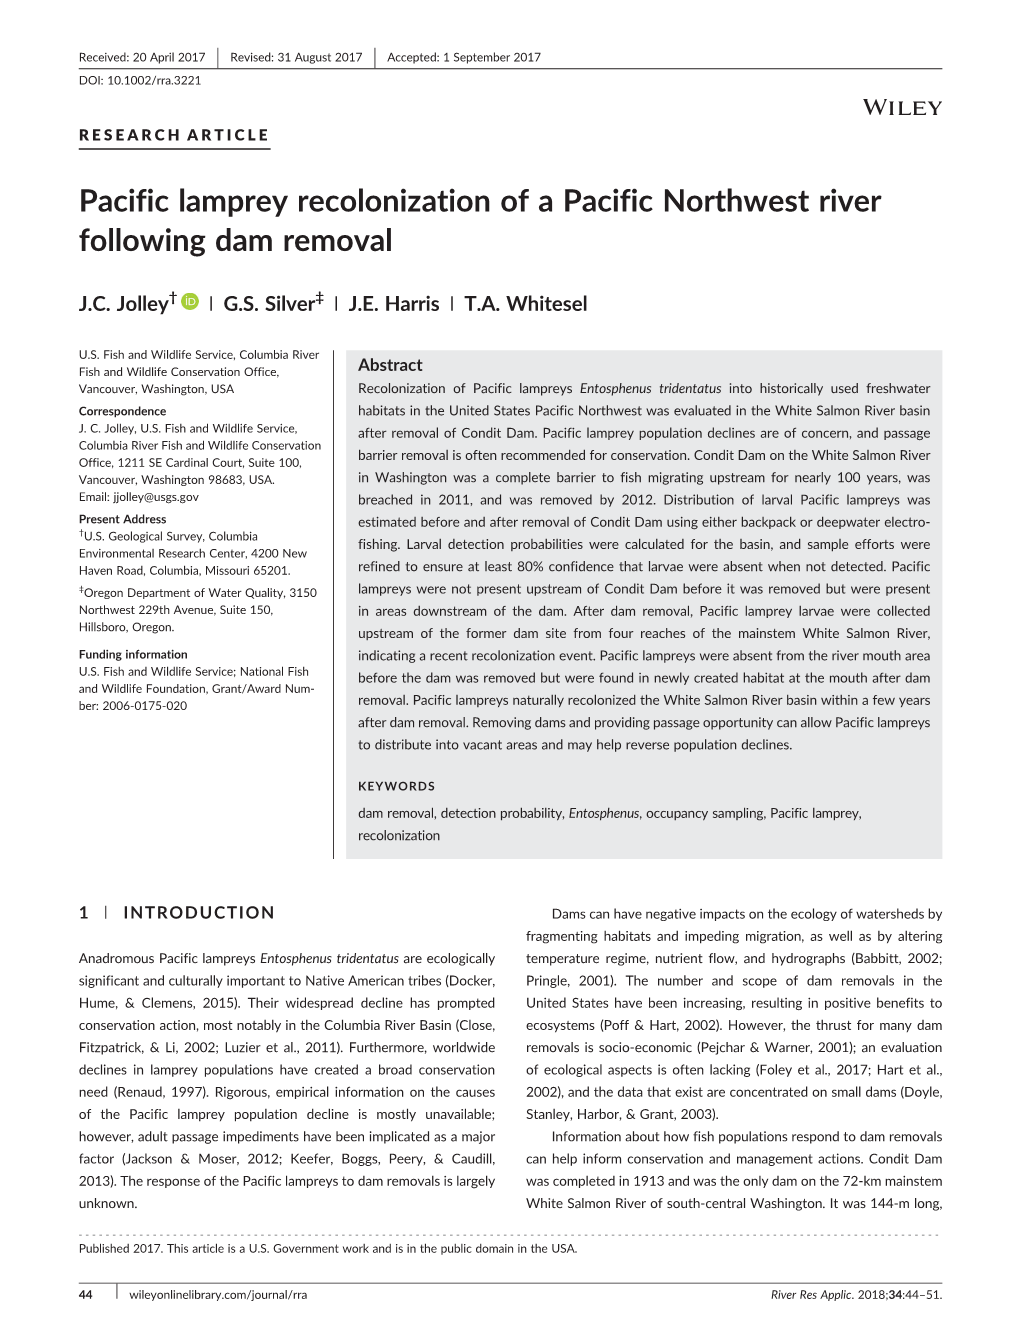 Pacific Lamprey Recolonization of a Pacific Northwest River Following Dam Removal